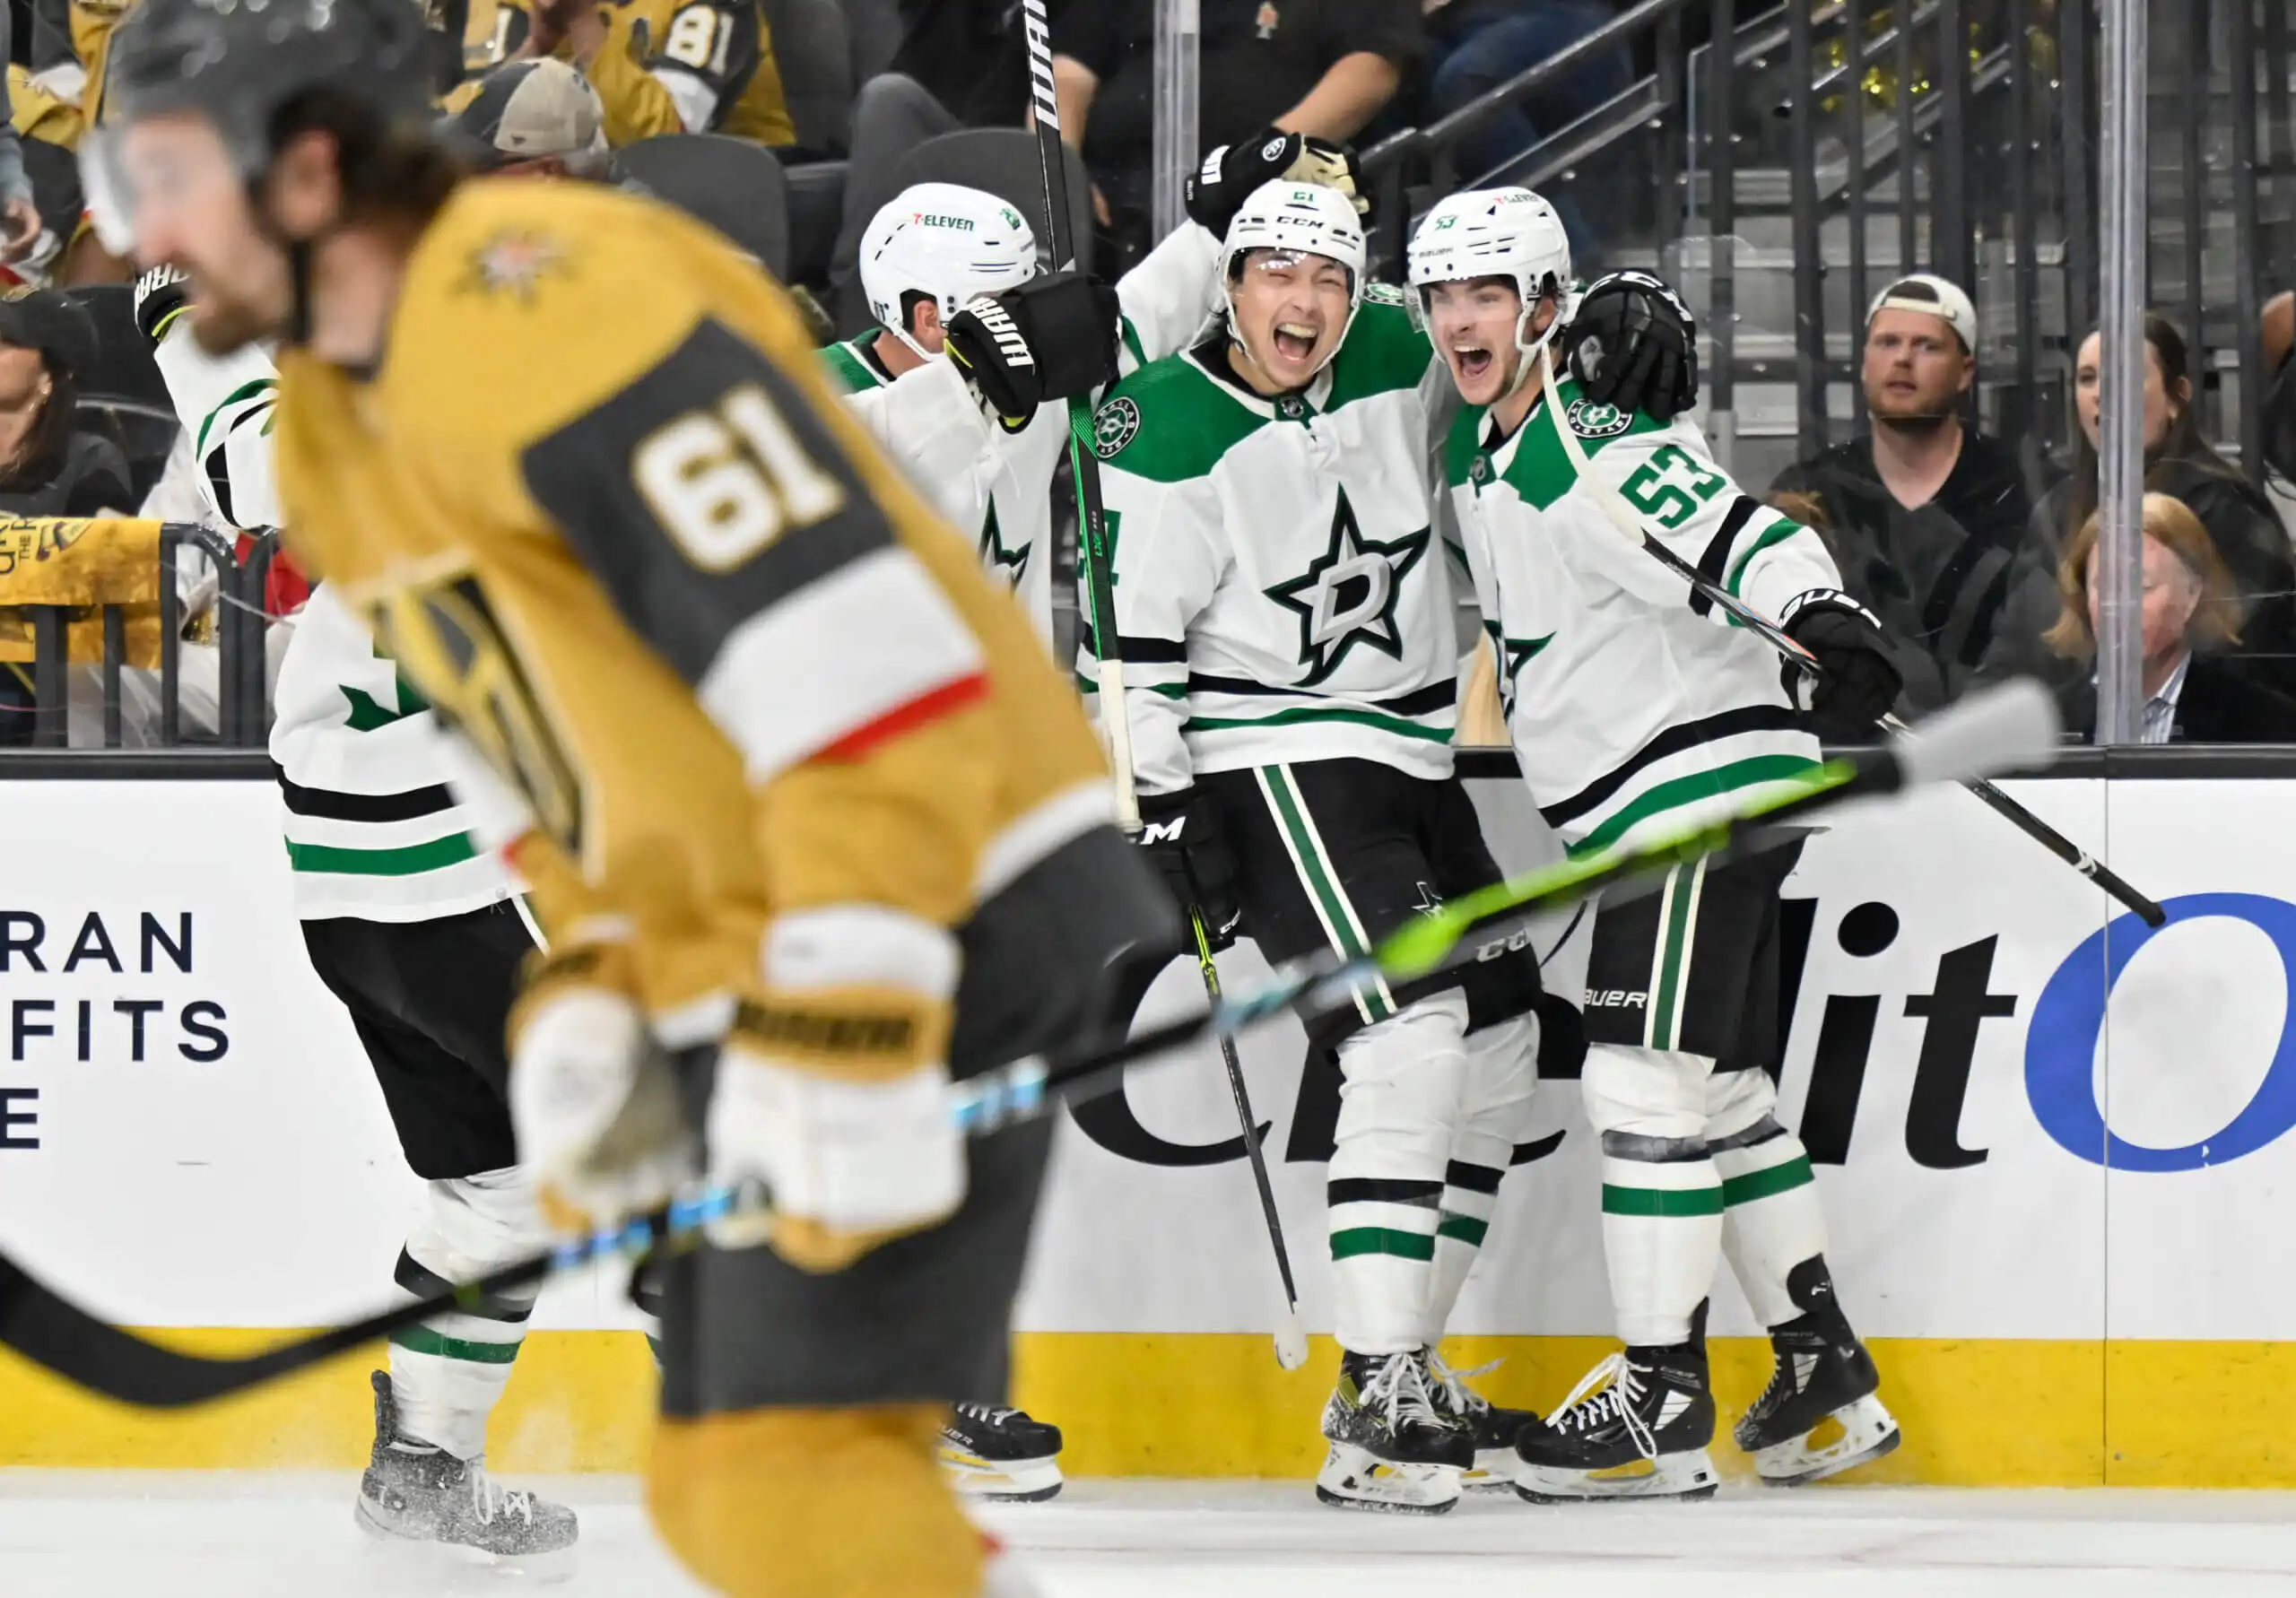 20-year-old elite player leads Dallas Stars to series comeback against Vegas Golden Knights